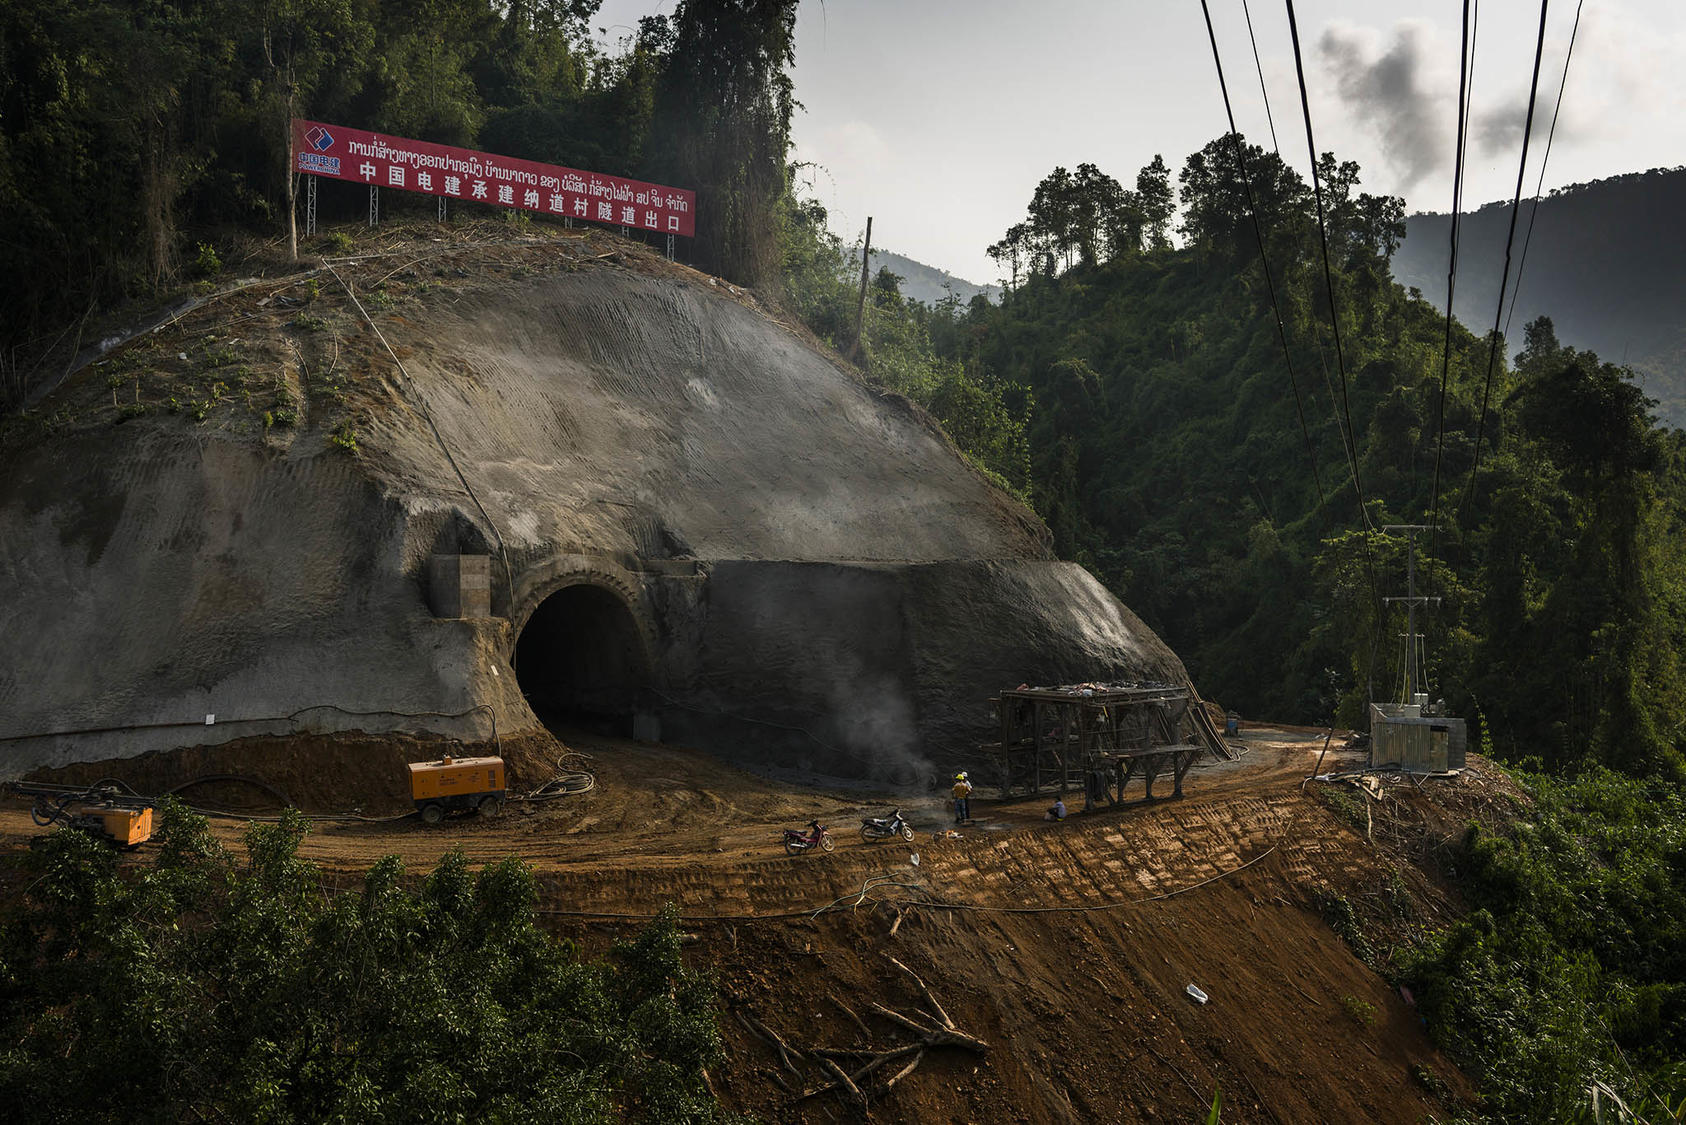 Chinese workers at the entrance to a tunnel near Vang Vieng, Laos, which is part of a railway project from China to Laos, May 8, 2017. (Adam Dean/The New York Times)